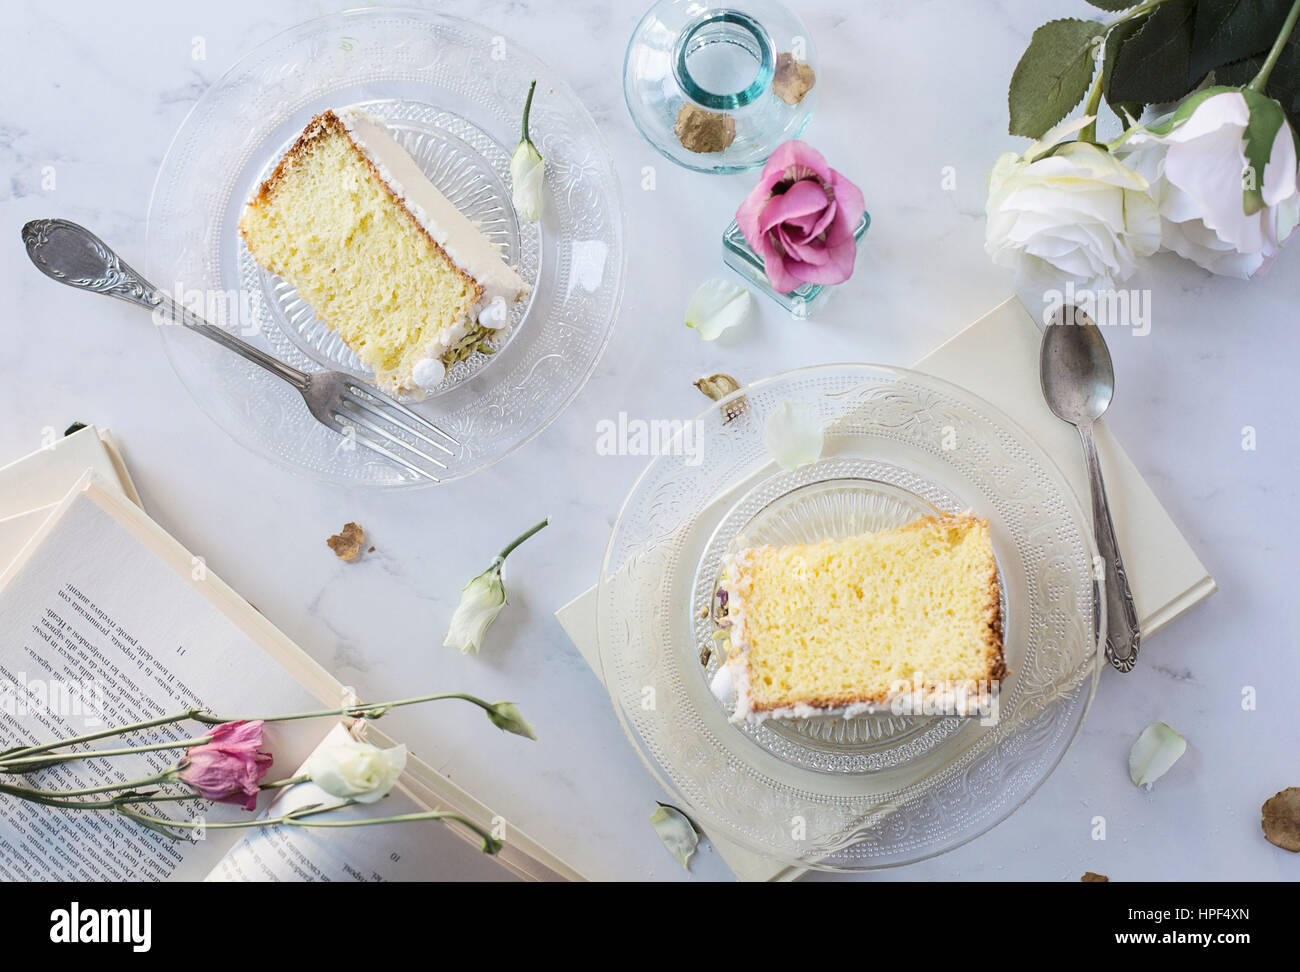 Slices of chiffon cake on marble table Stock Photo